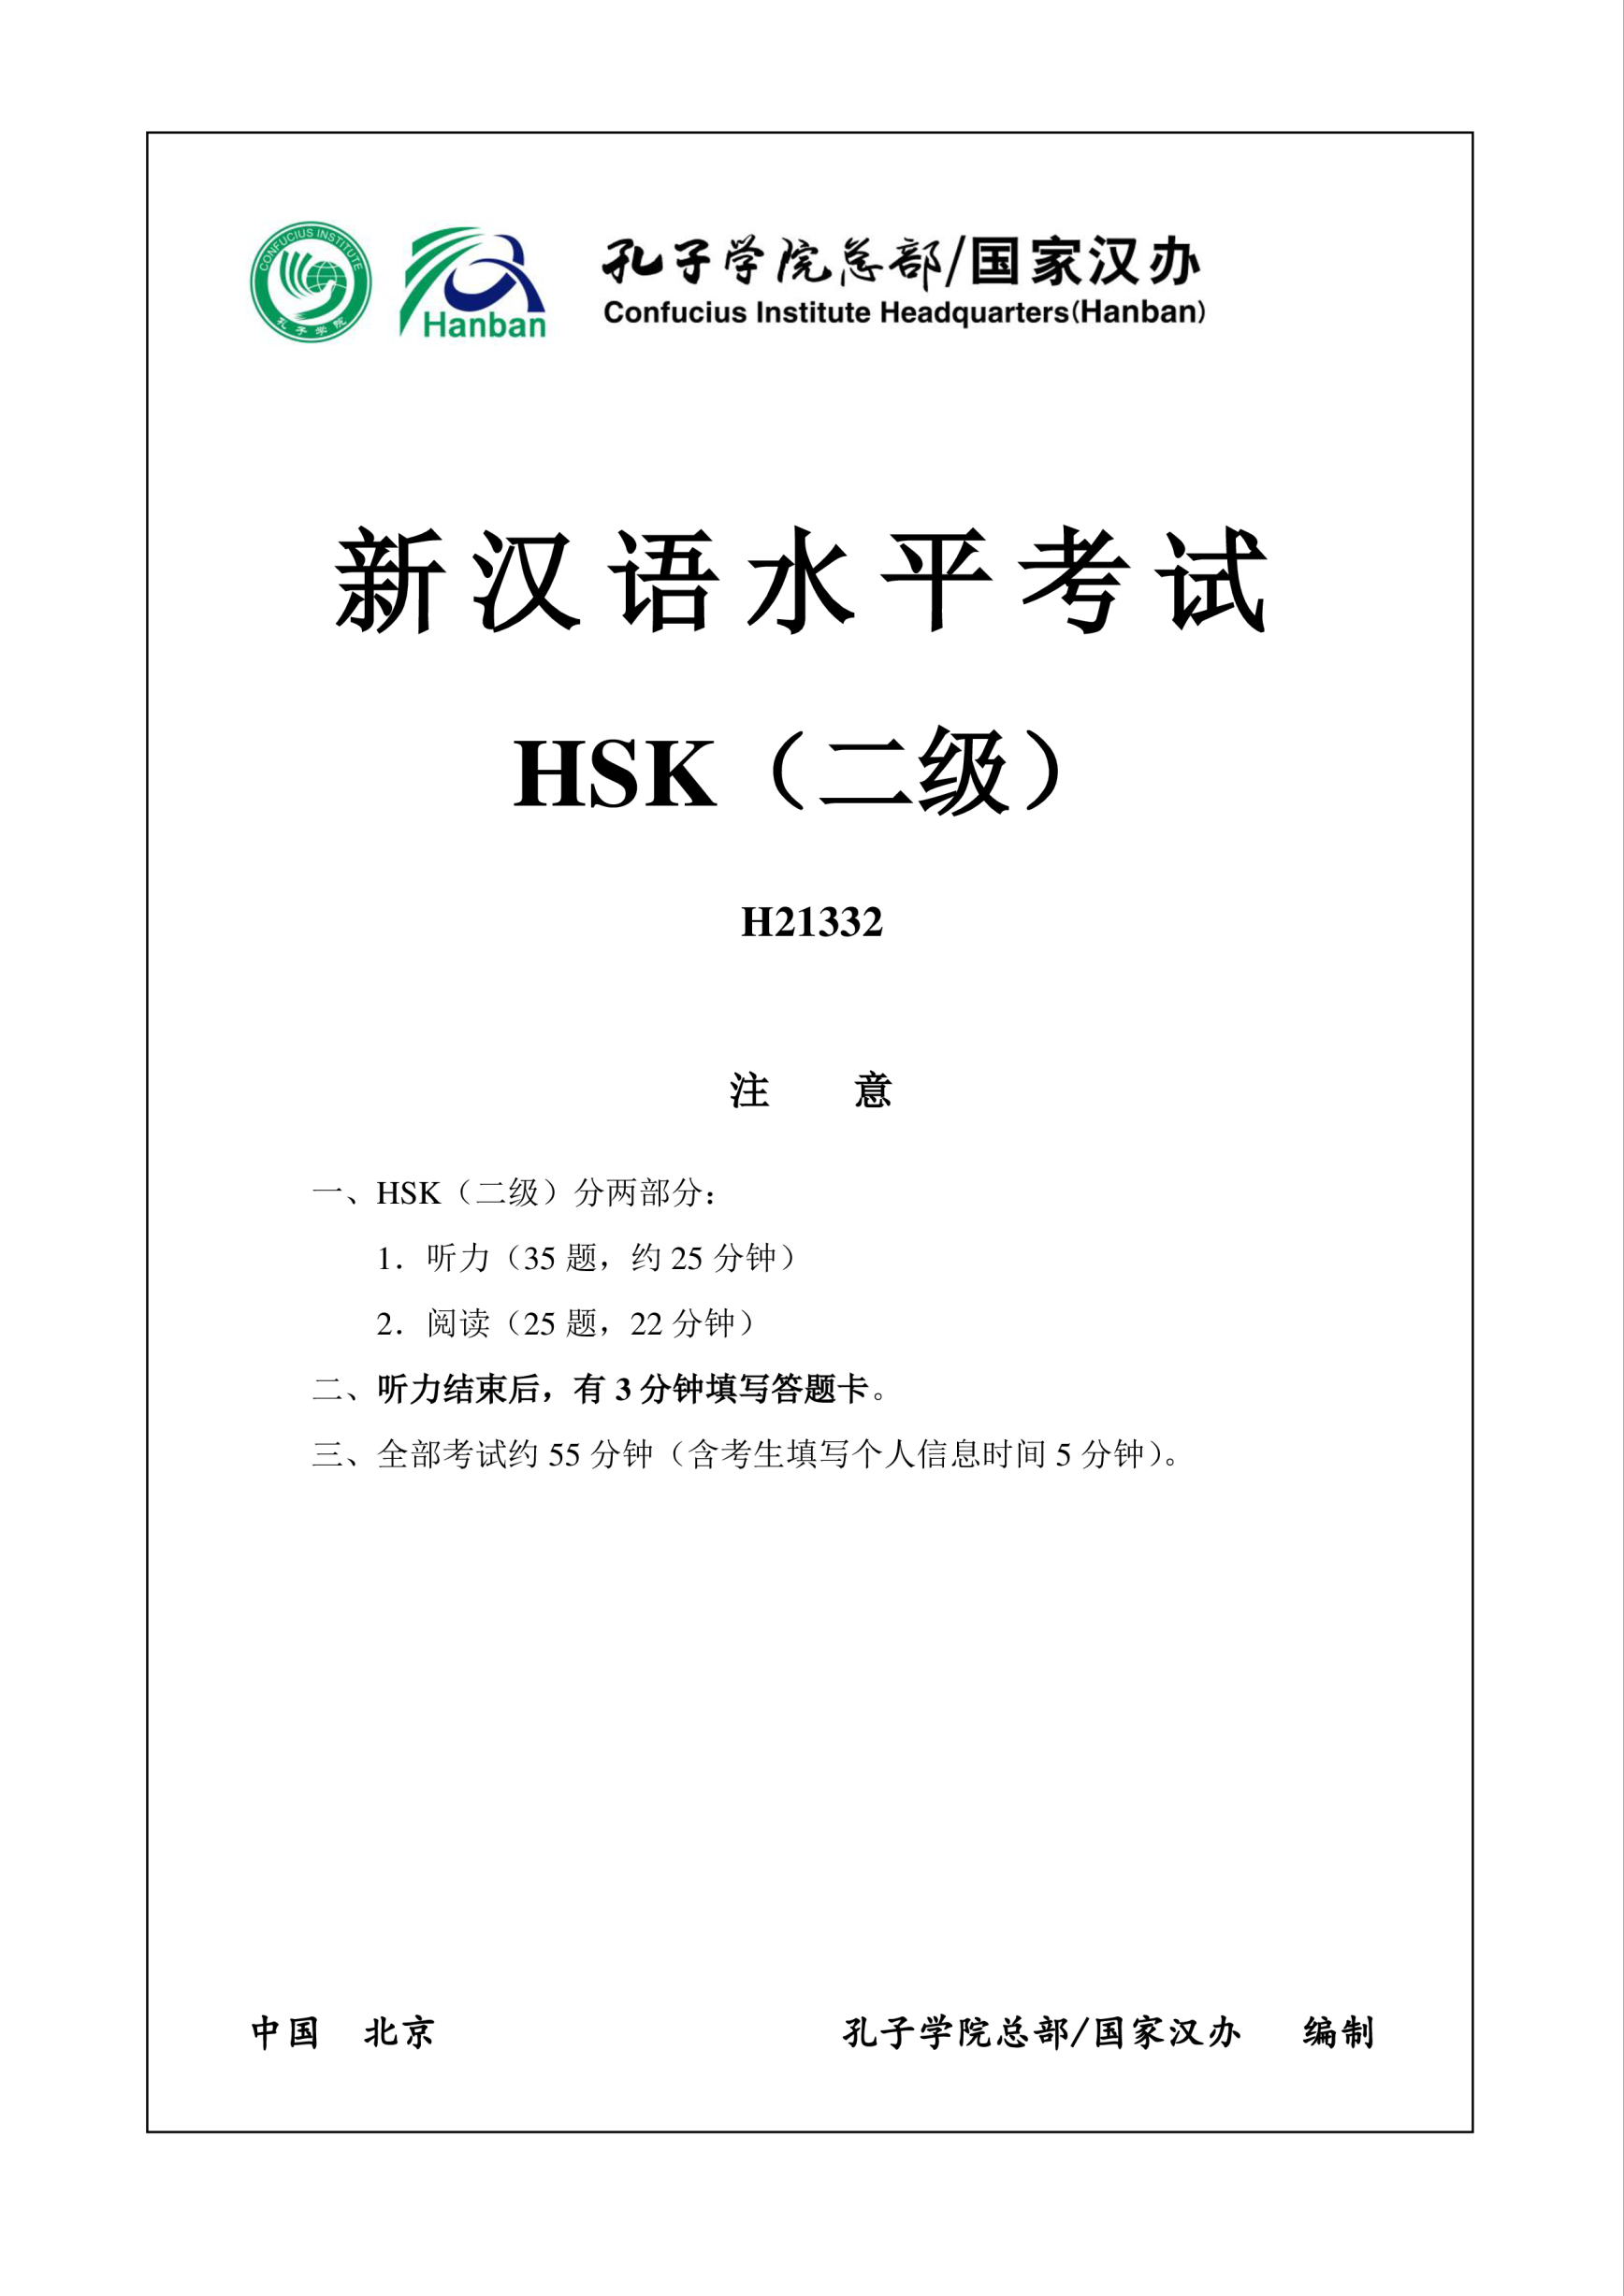 template preview imageHSK2 Chinese Exam including Answers # HSK2 H21332